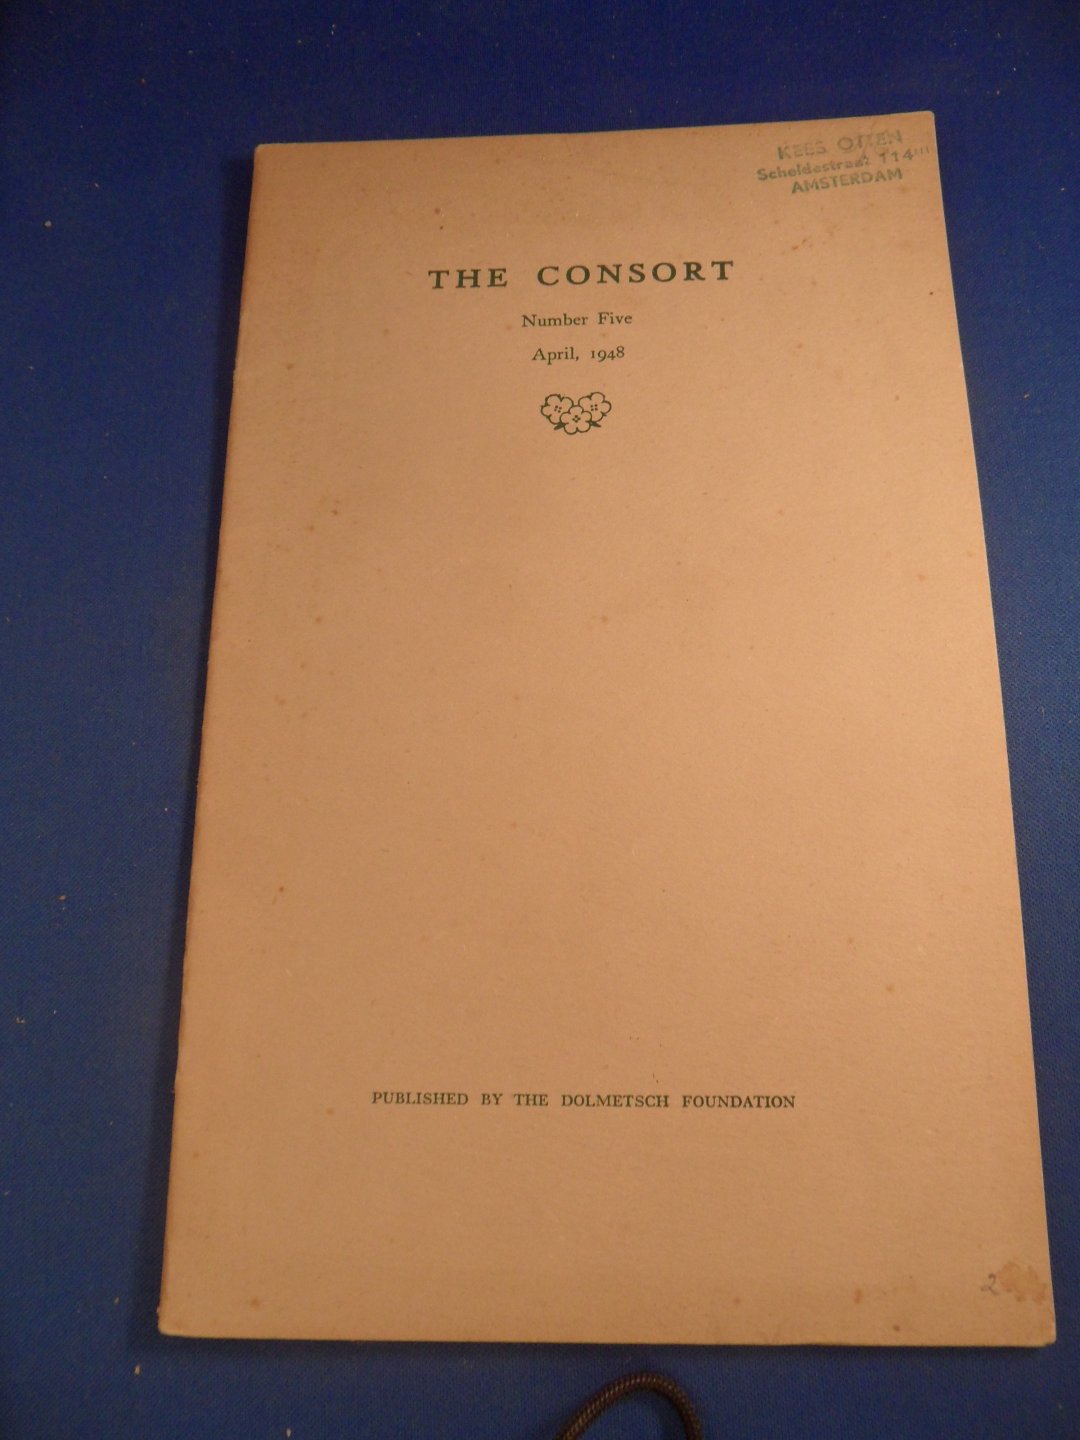 Dolmetsch foundation - The consort, no. 5, 1948. Journal of the Dolmetsch foundation